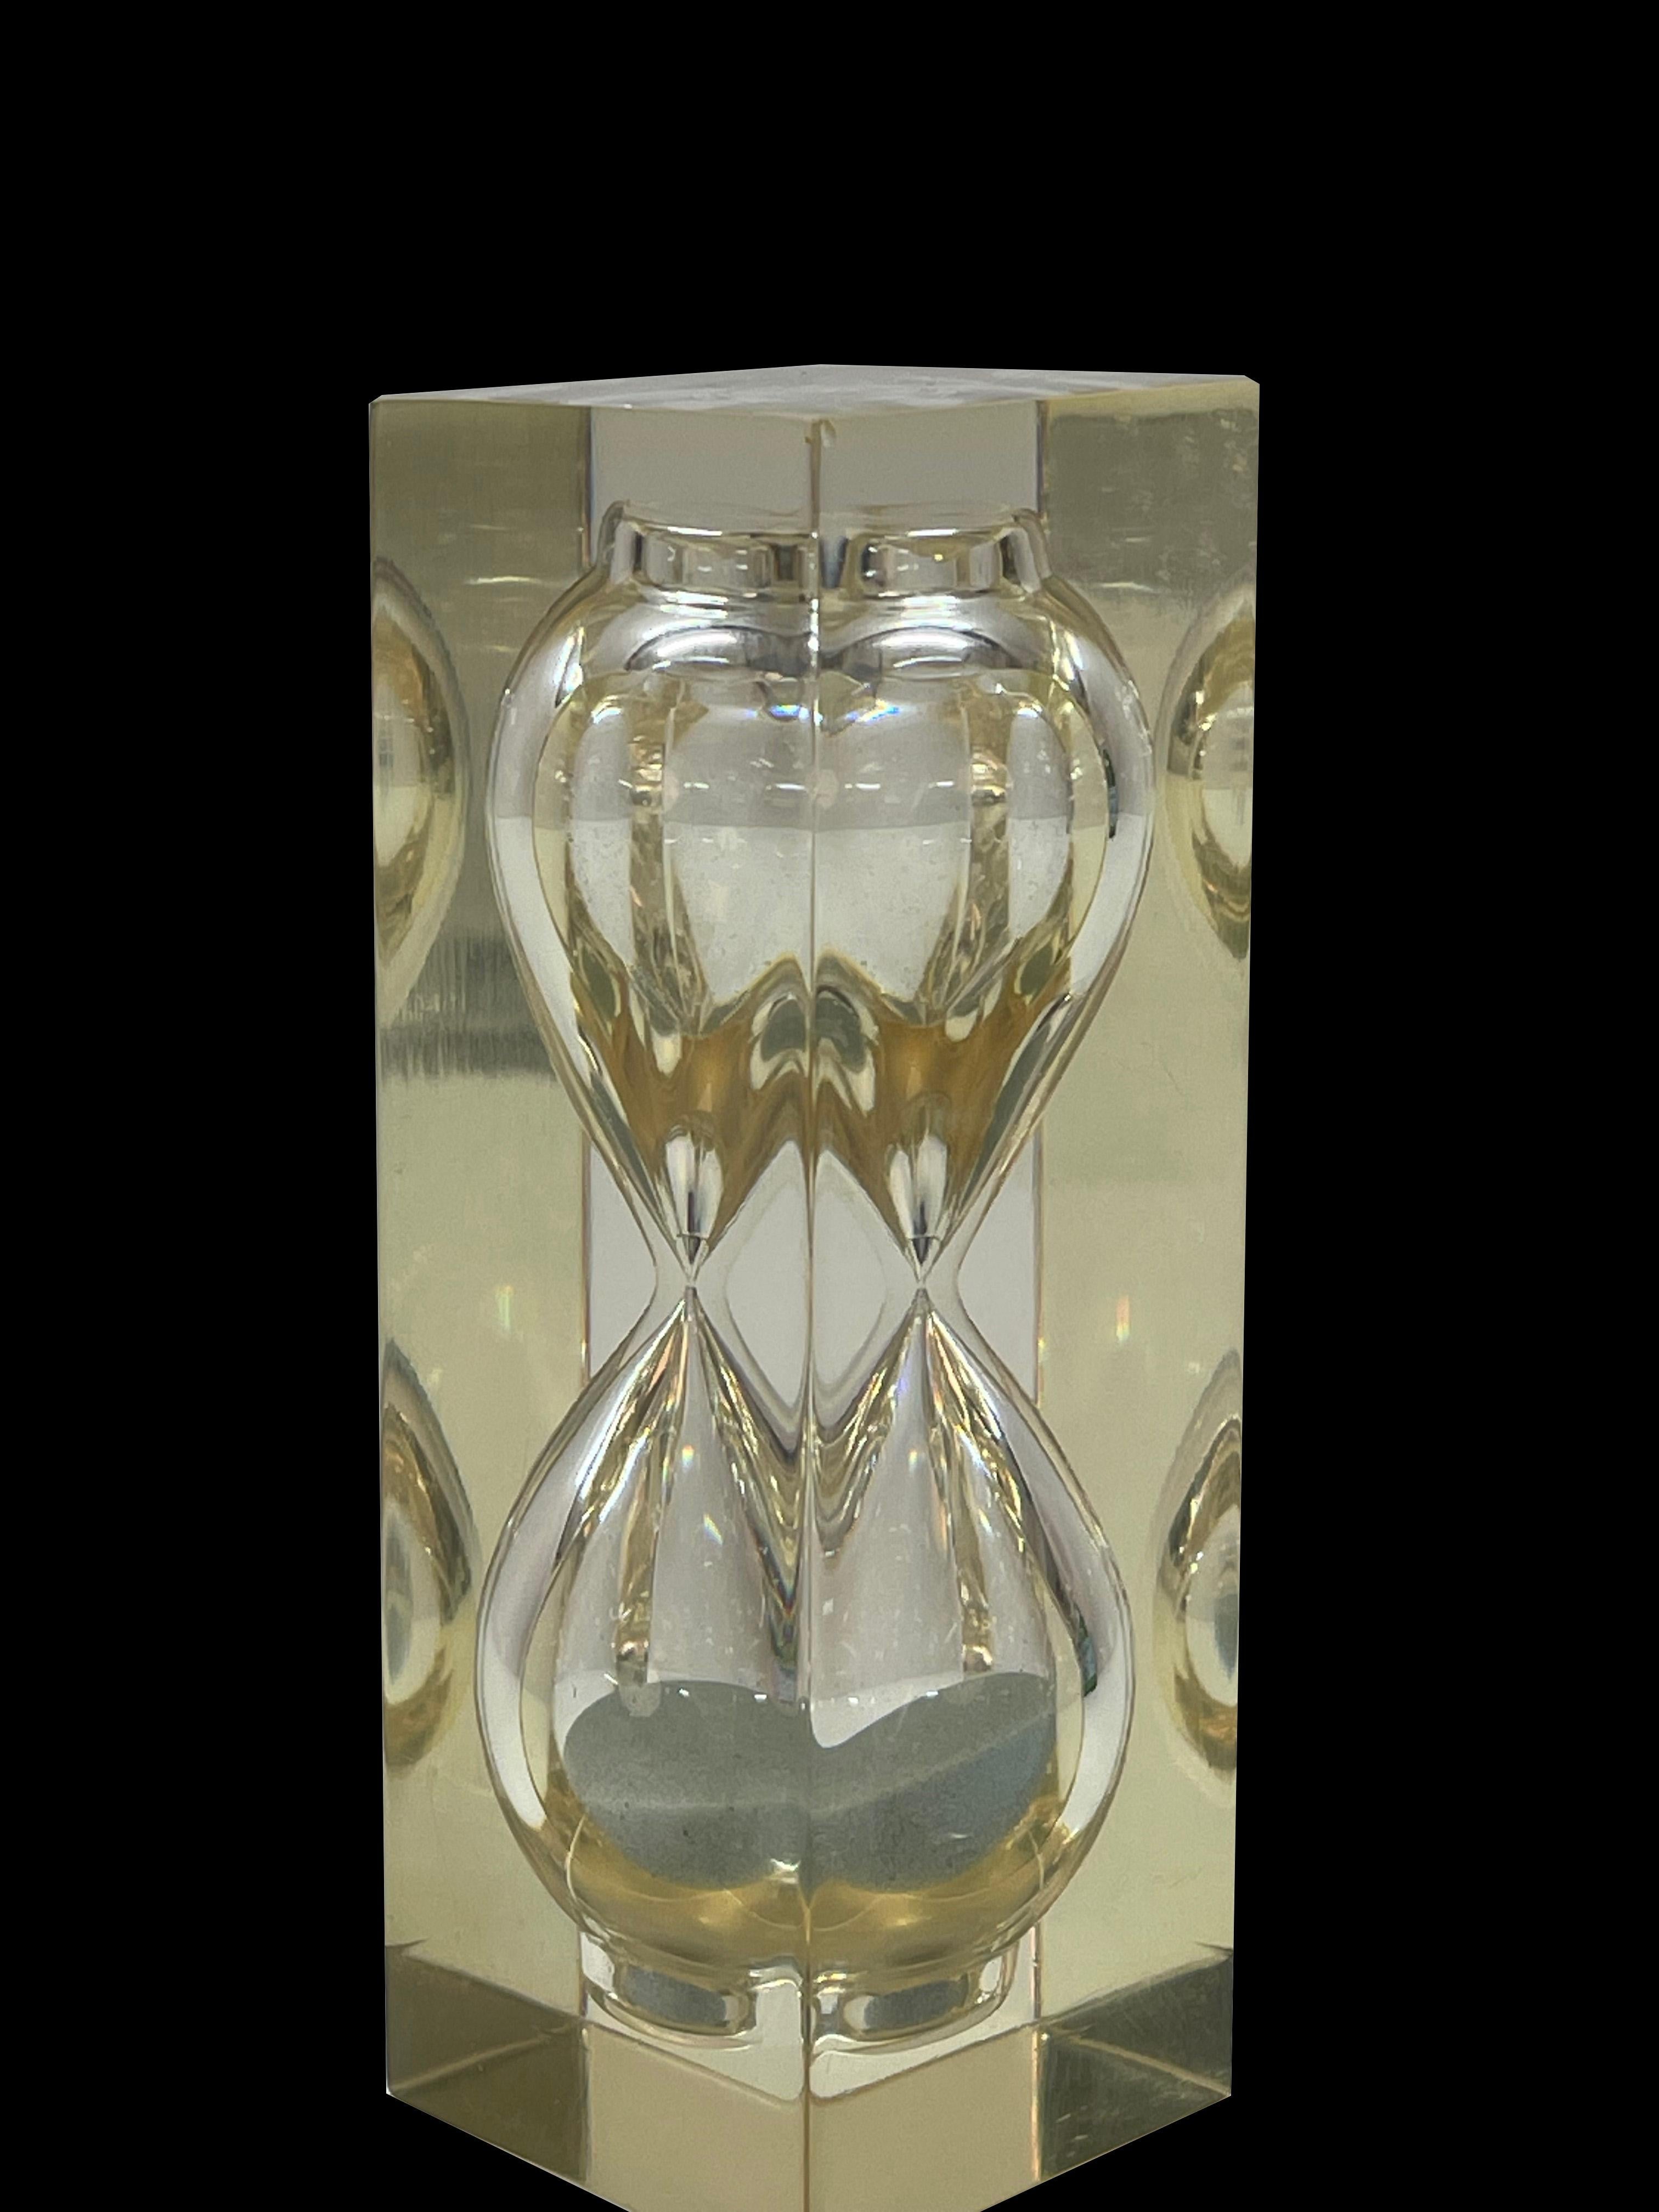 Midcentury Lucite Hourglass Sand Timer Sculpture After Charles Hollis Jones 1970 For Sale 3